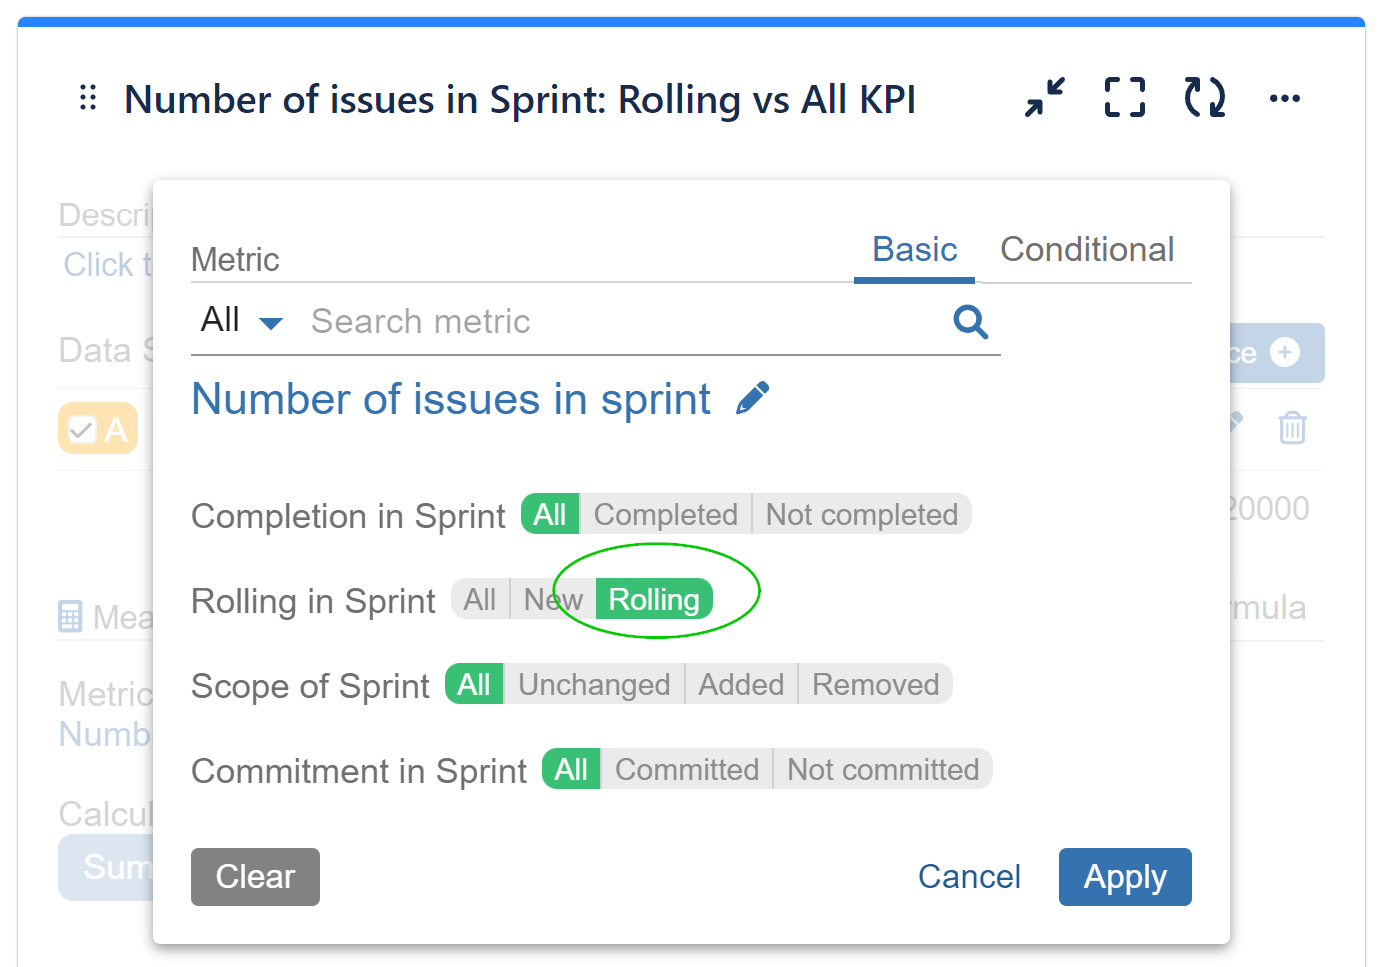 Rolling issues in sprint